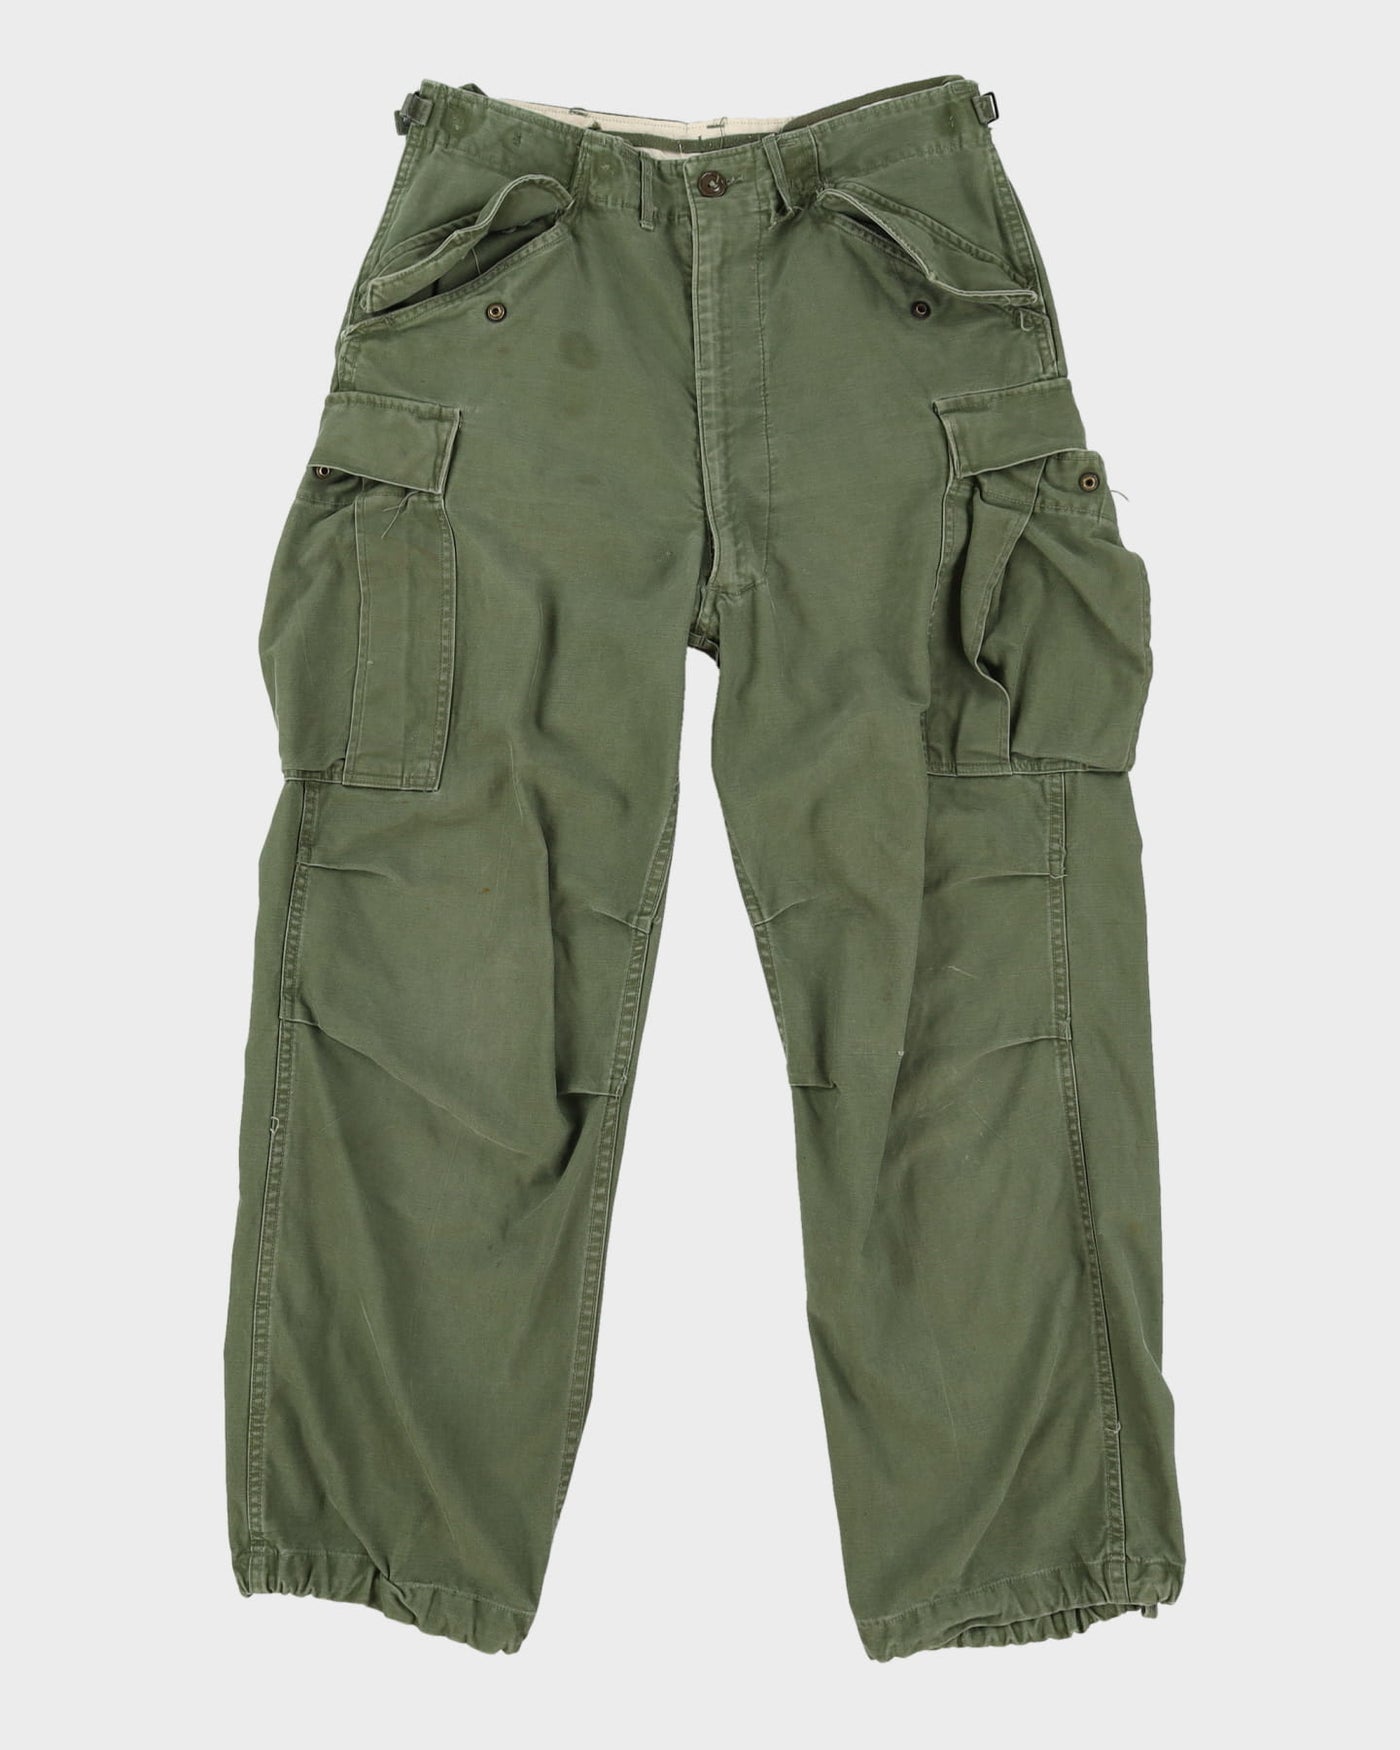 1950s Vintage US Army M51 Cold Weather Trousers - 30x28